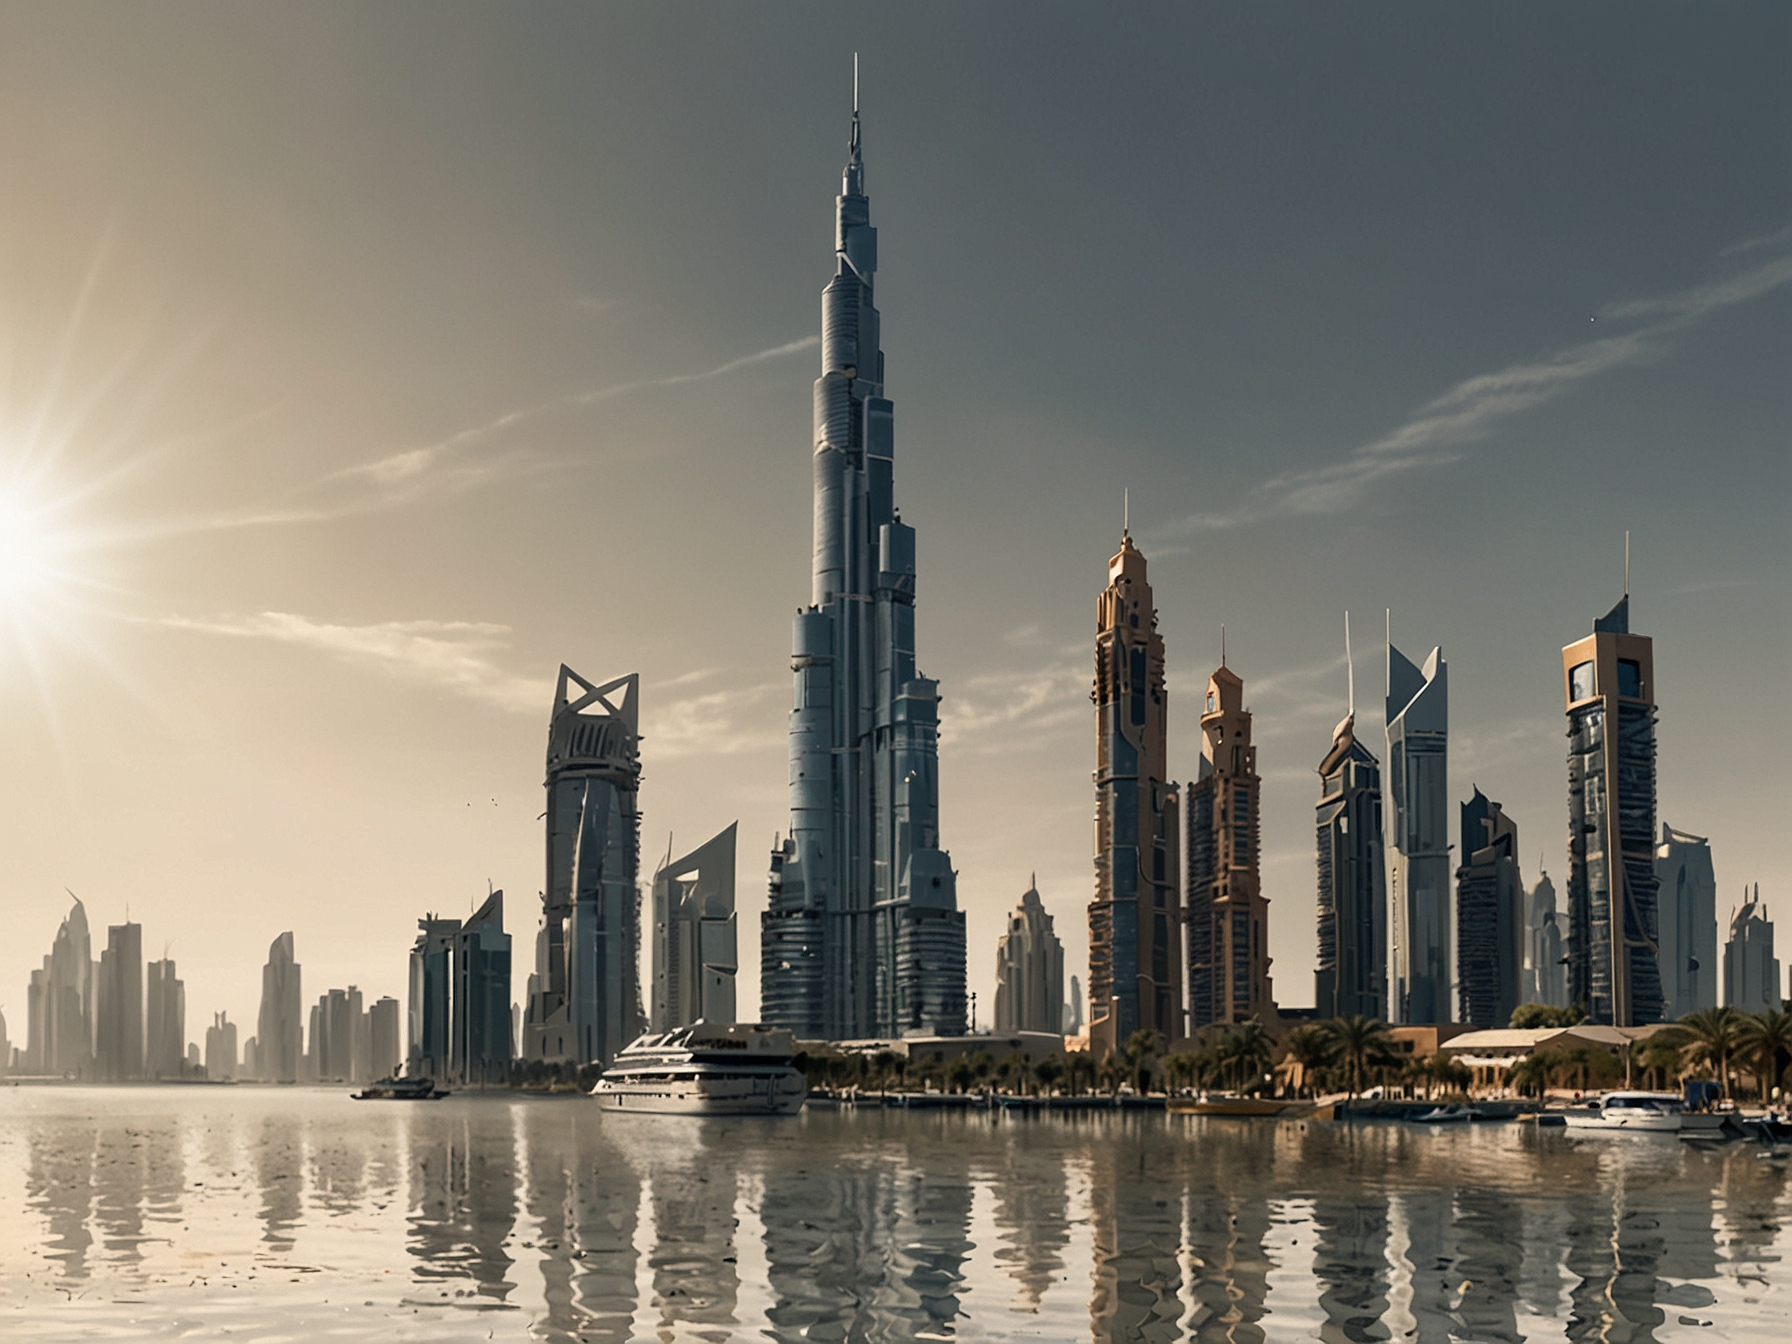 A panoramic view of Dubai's skyline under a scorching sun, illustrating the extreme heat the Gulf States face, with temperatures exceeding 50 degrees Celsius during summer.